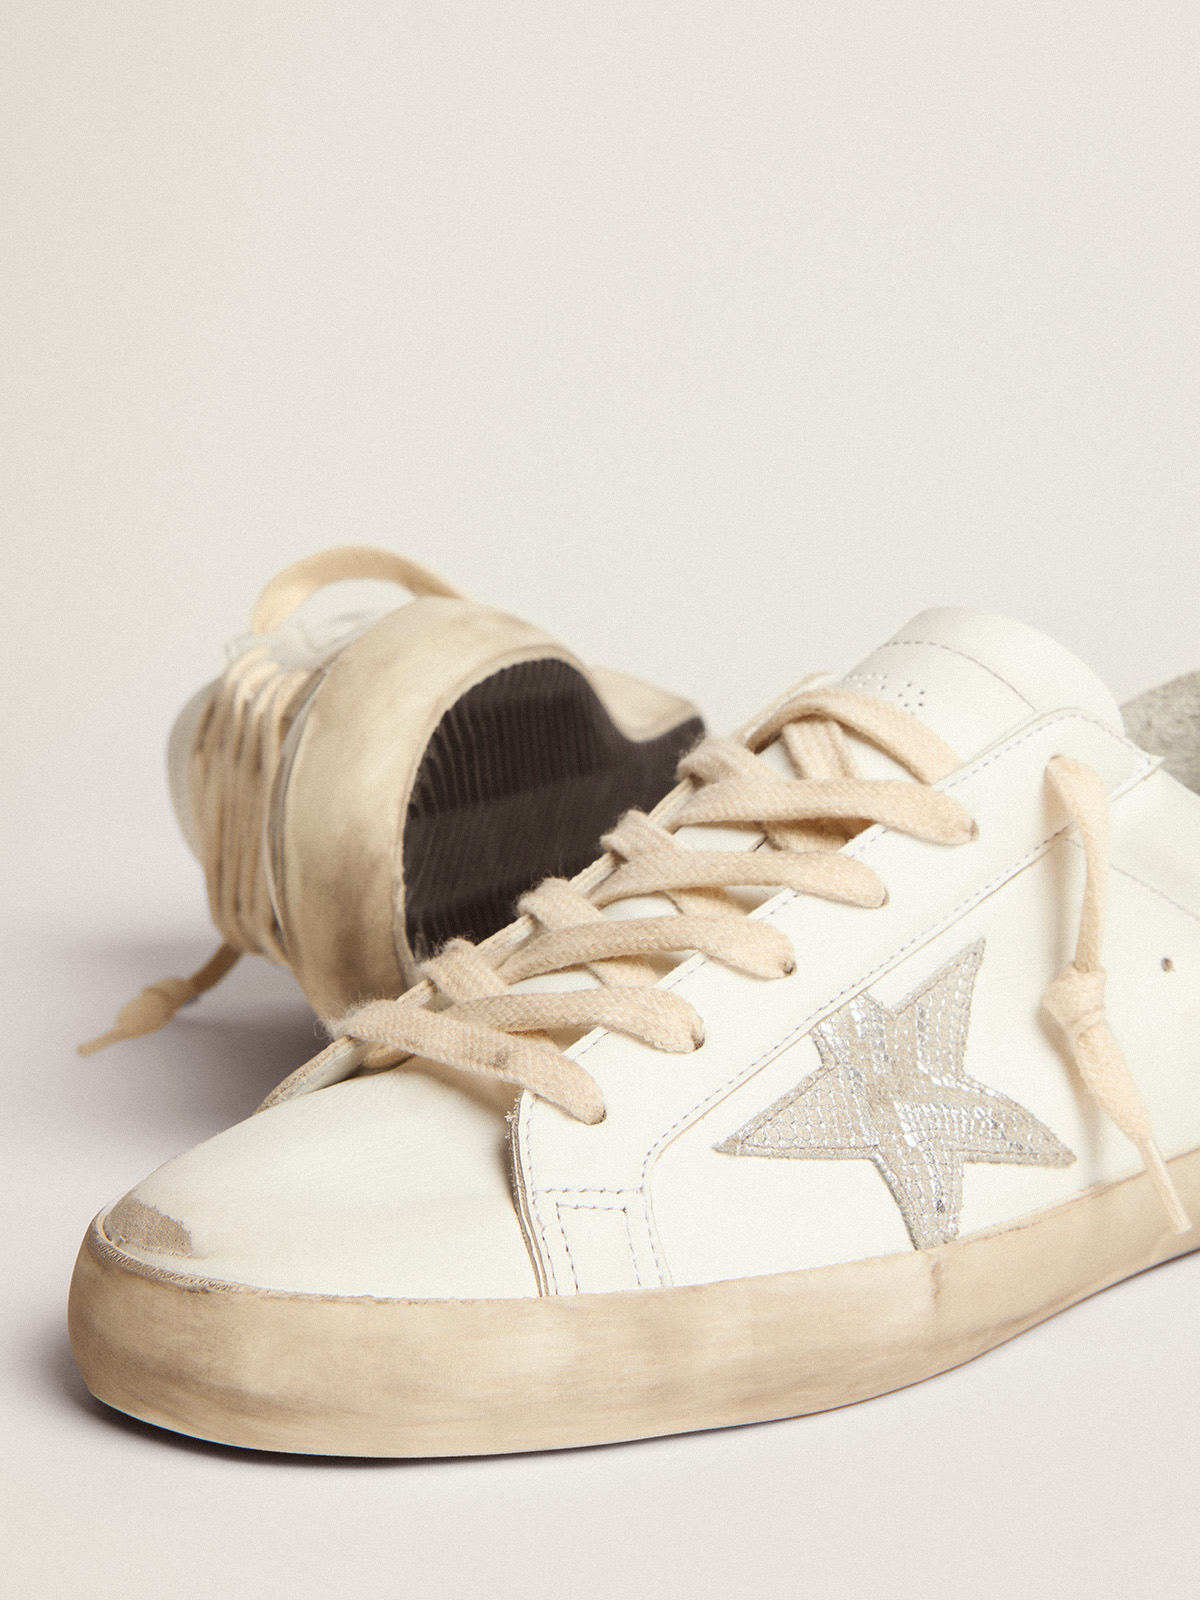 Women's Super-Star with silver leather star and snake print